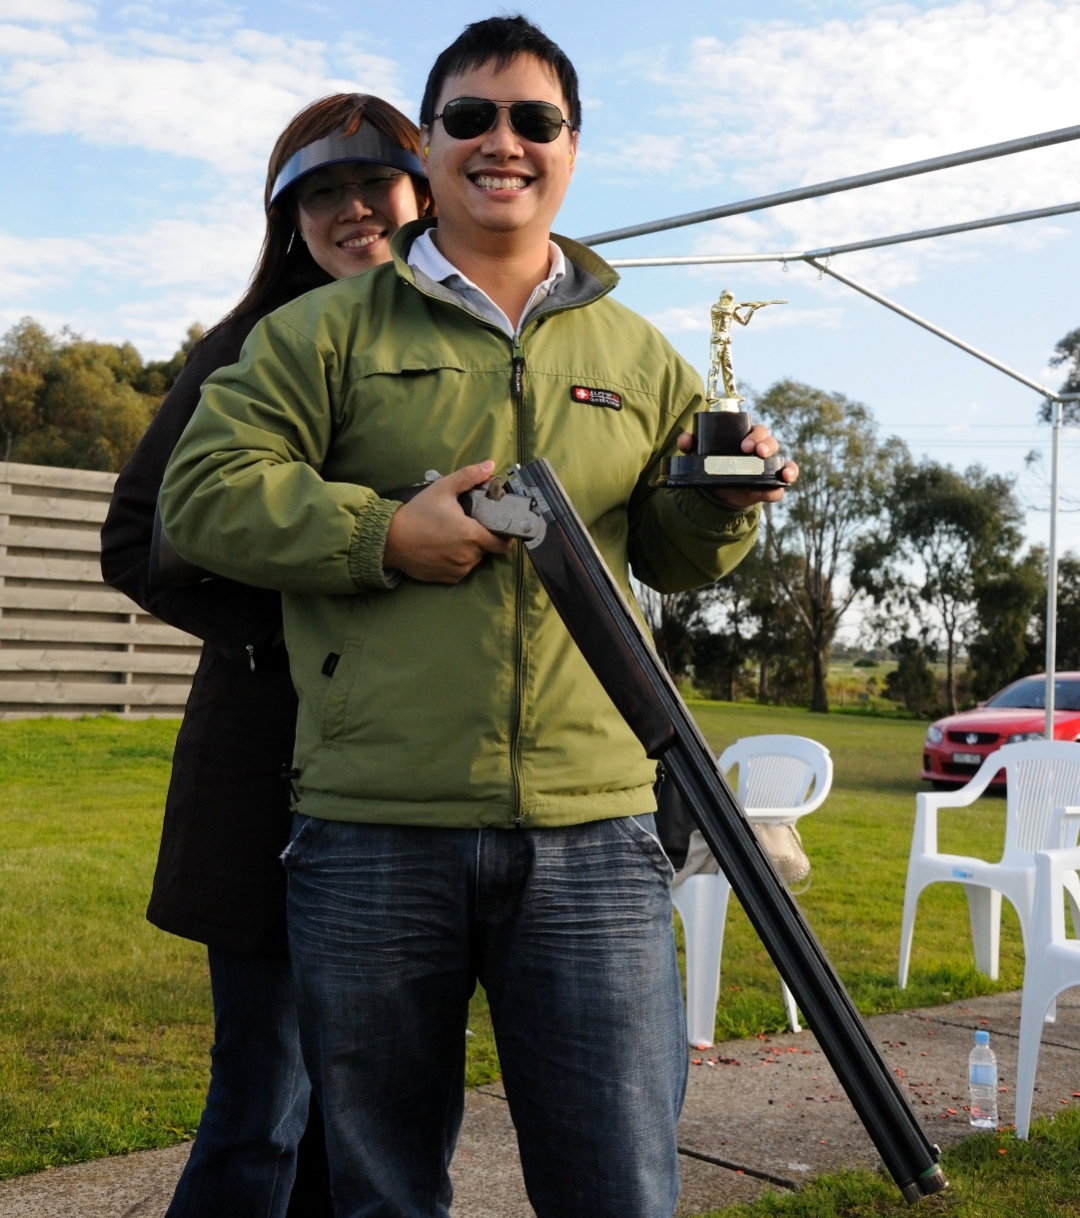 Exclusive session for 4 - Unlimited Clay Target Shooting with Olympic Medalist & 3 x World # 1 Adam Vella - Gift Voucher